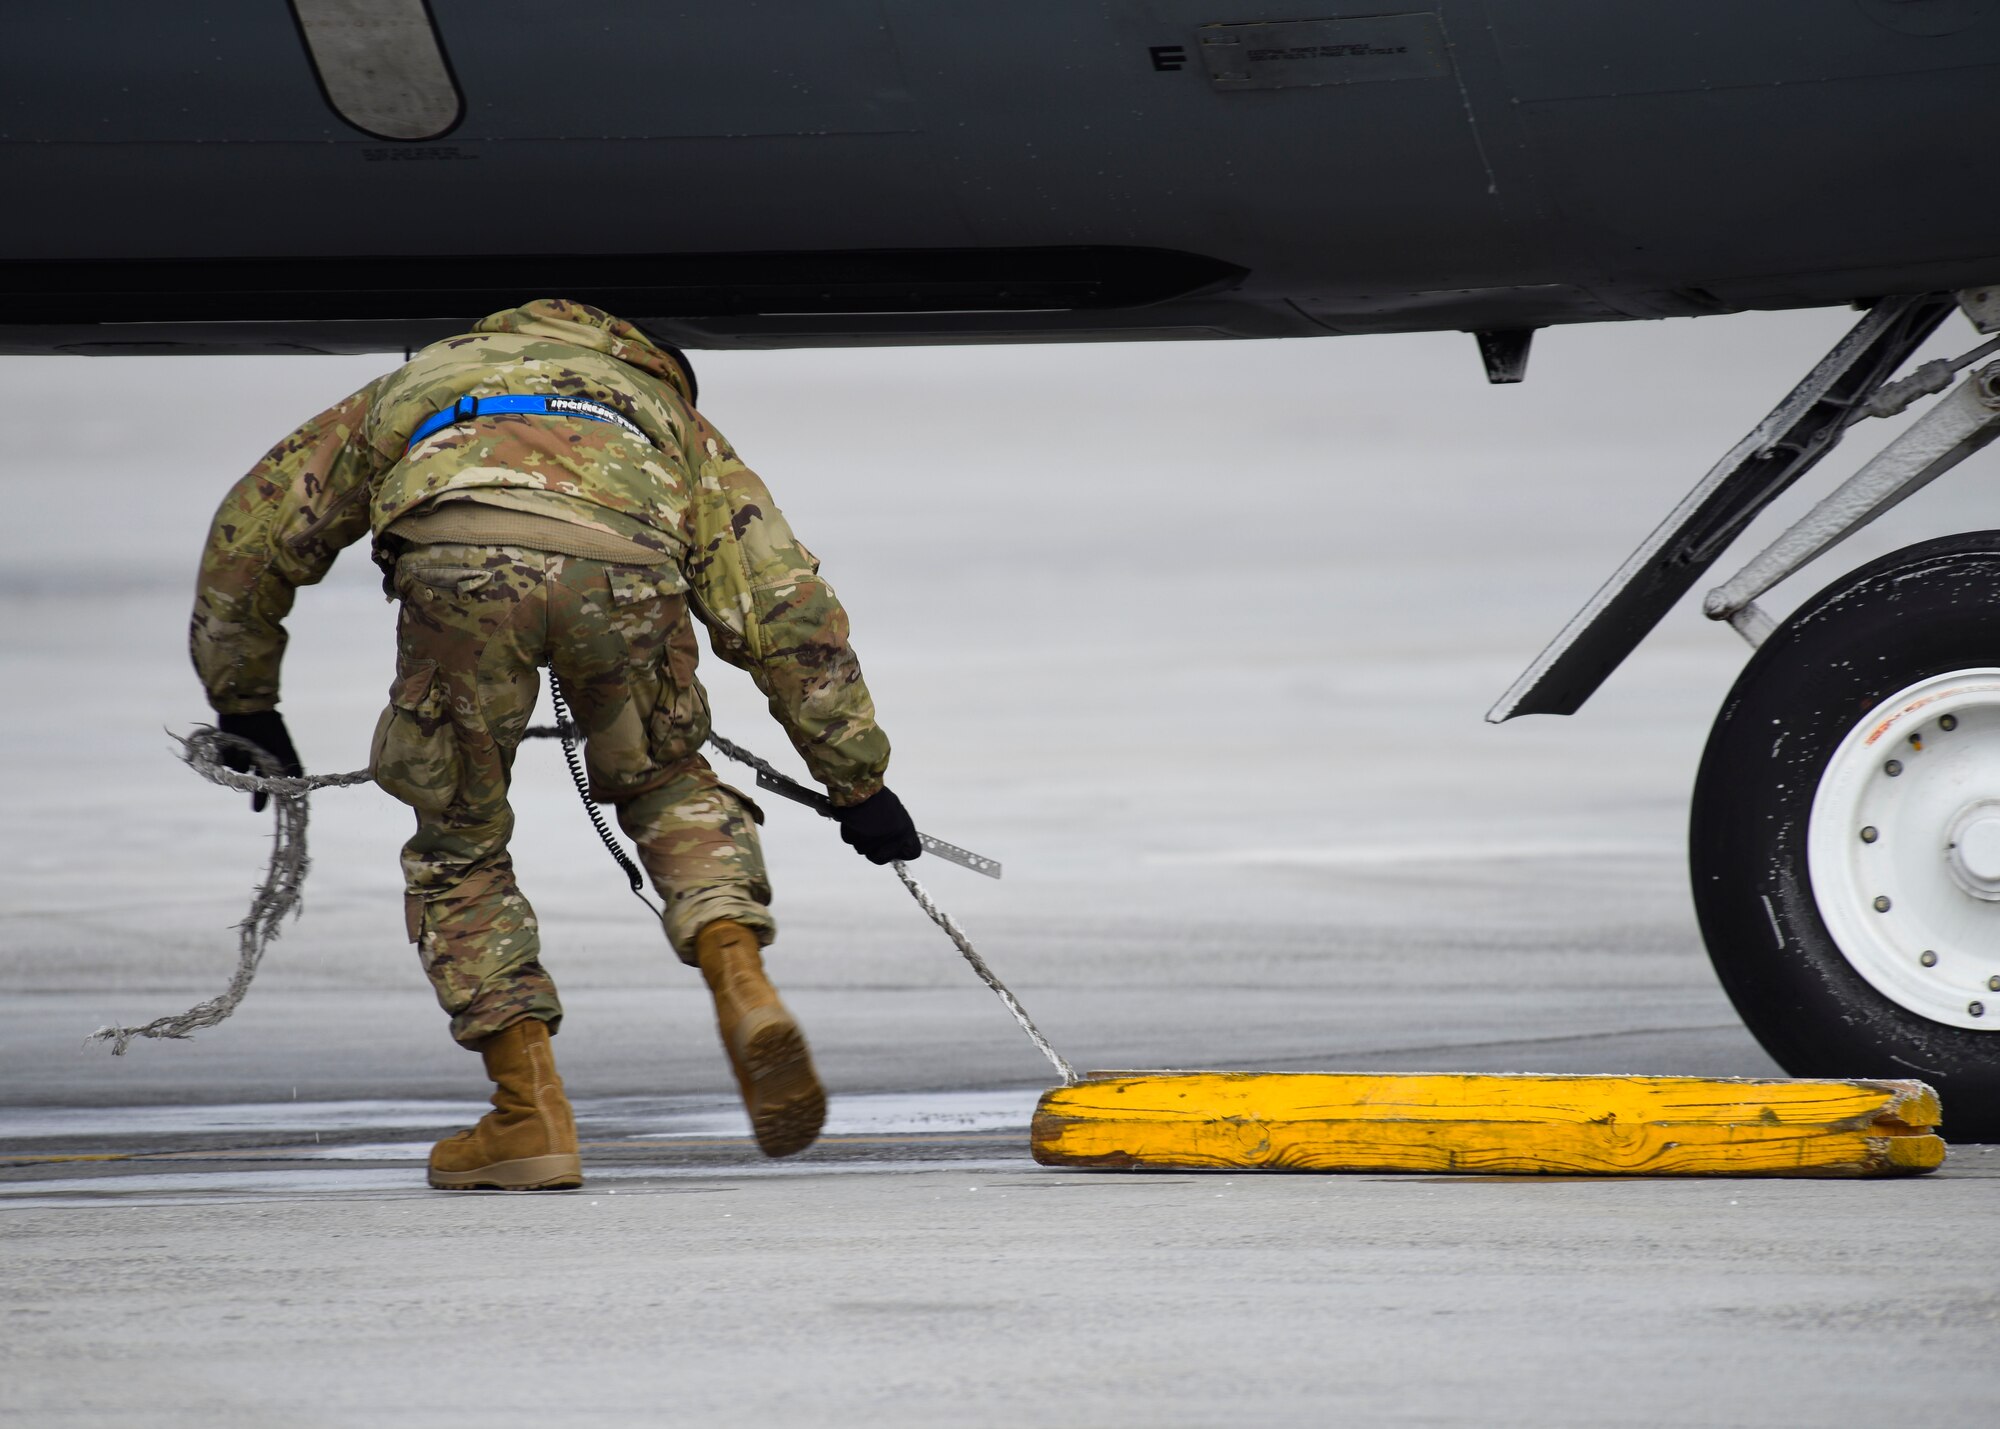 U.S. Air Force Senior Airman Zachery Murray, 92nd Aircraft Maintenance Squadron crew chief, removes a chalk from behind the landing gear of a KC-135 Stratotanker during Exercise Titan Fury at Fairchild Air Force Base, Washington, Dec. 9, 2019.